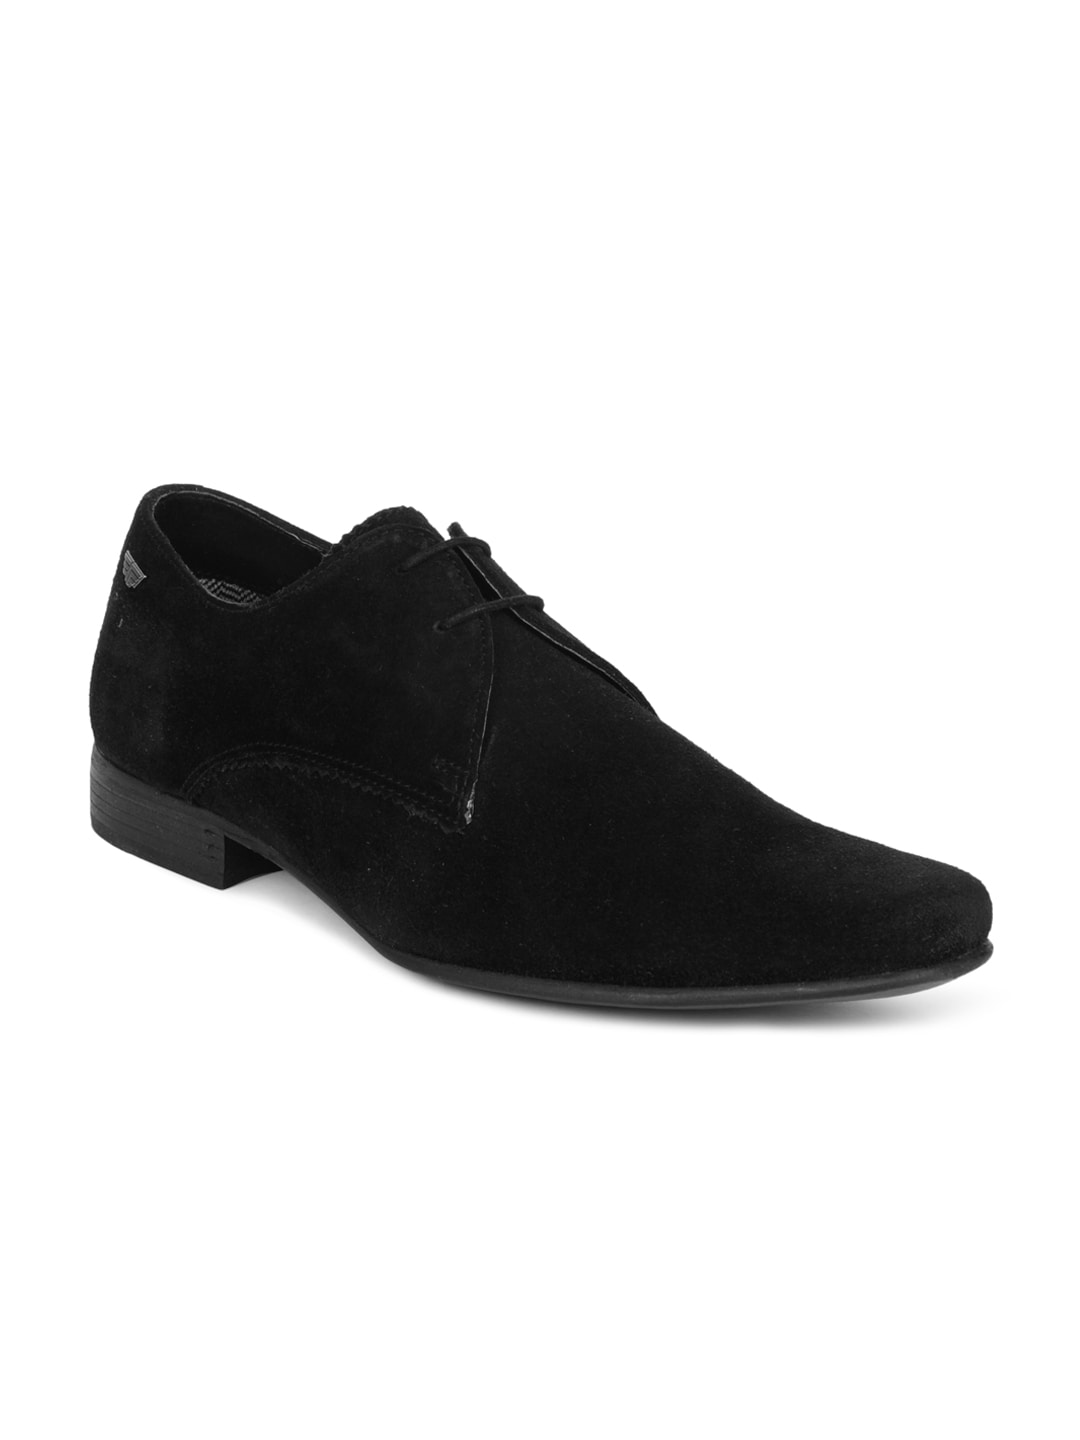 Red Tape Men Leather Black Shoes